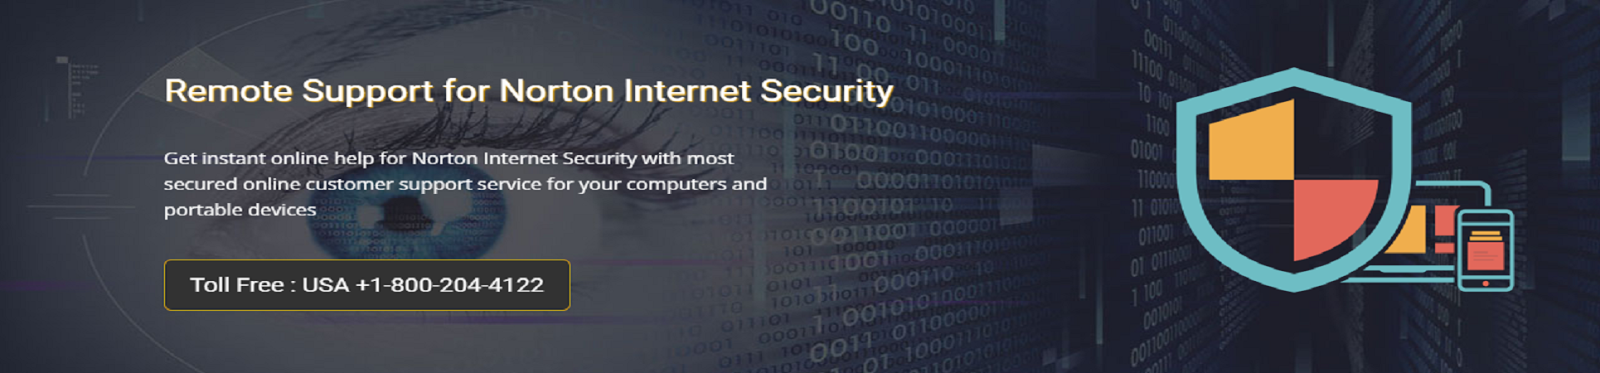 1 (800) 204-4122 Norton Internet Security Support Number